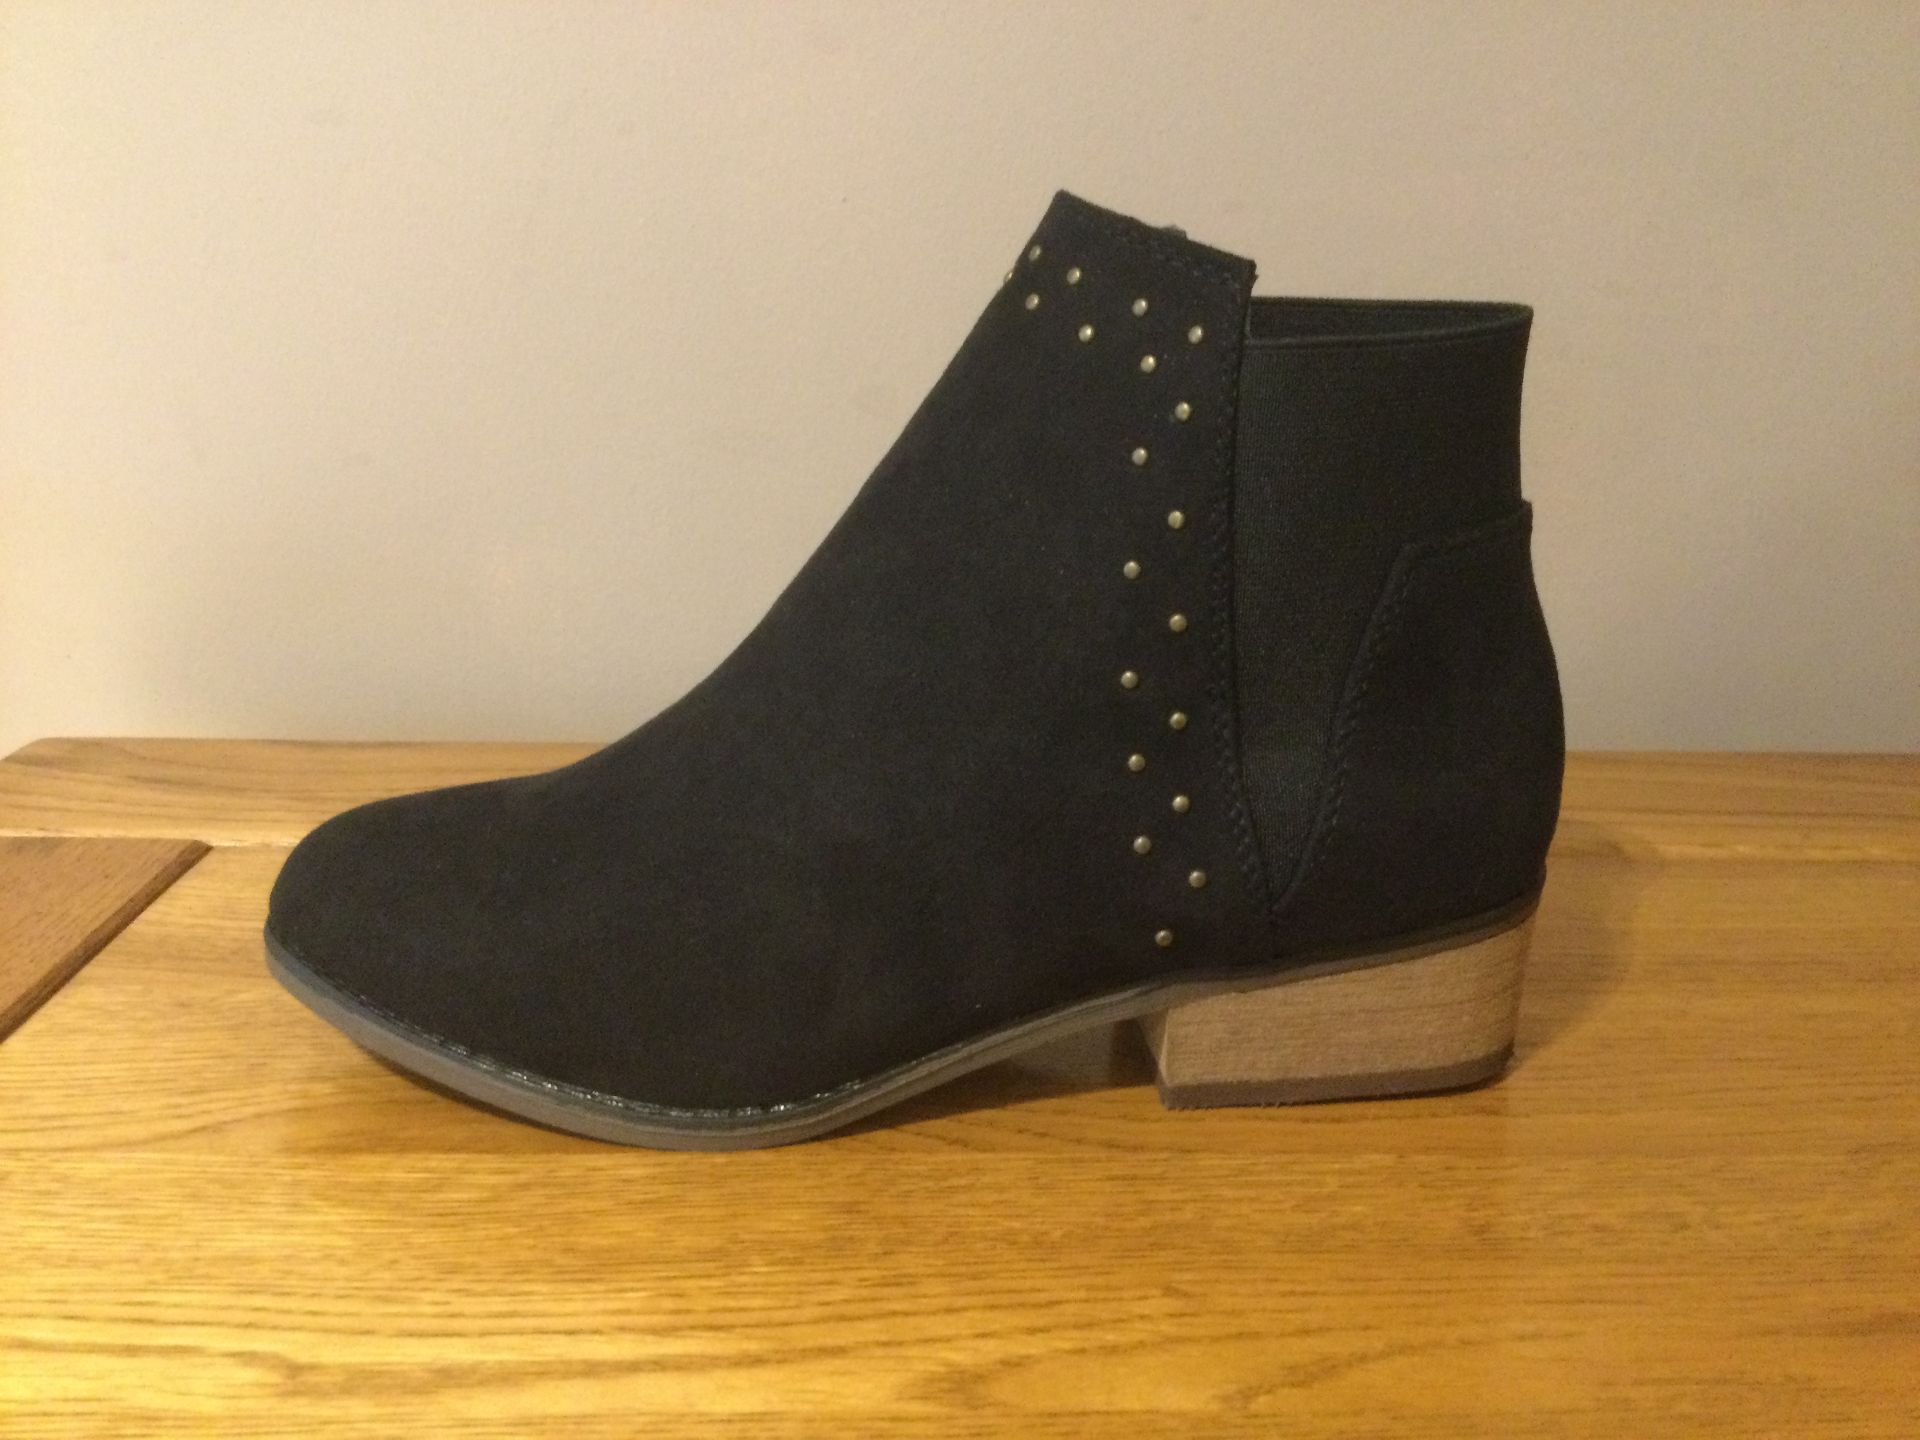 Dolcis “Wendy” Low Heel Ankle Boots, Size 5, Black - New RRP £45.99 - Image 4 of 7